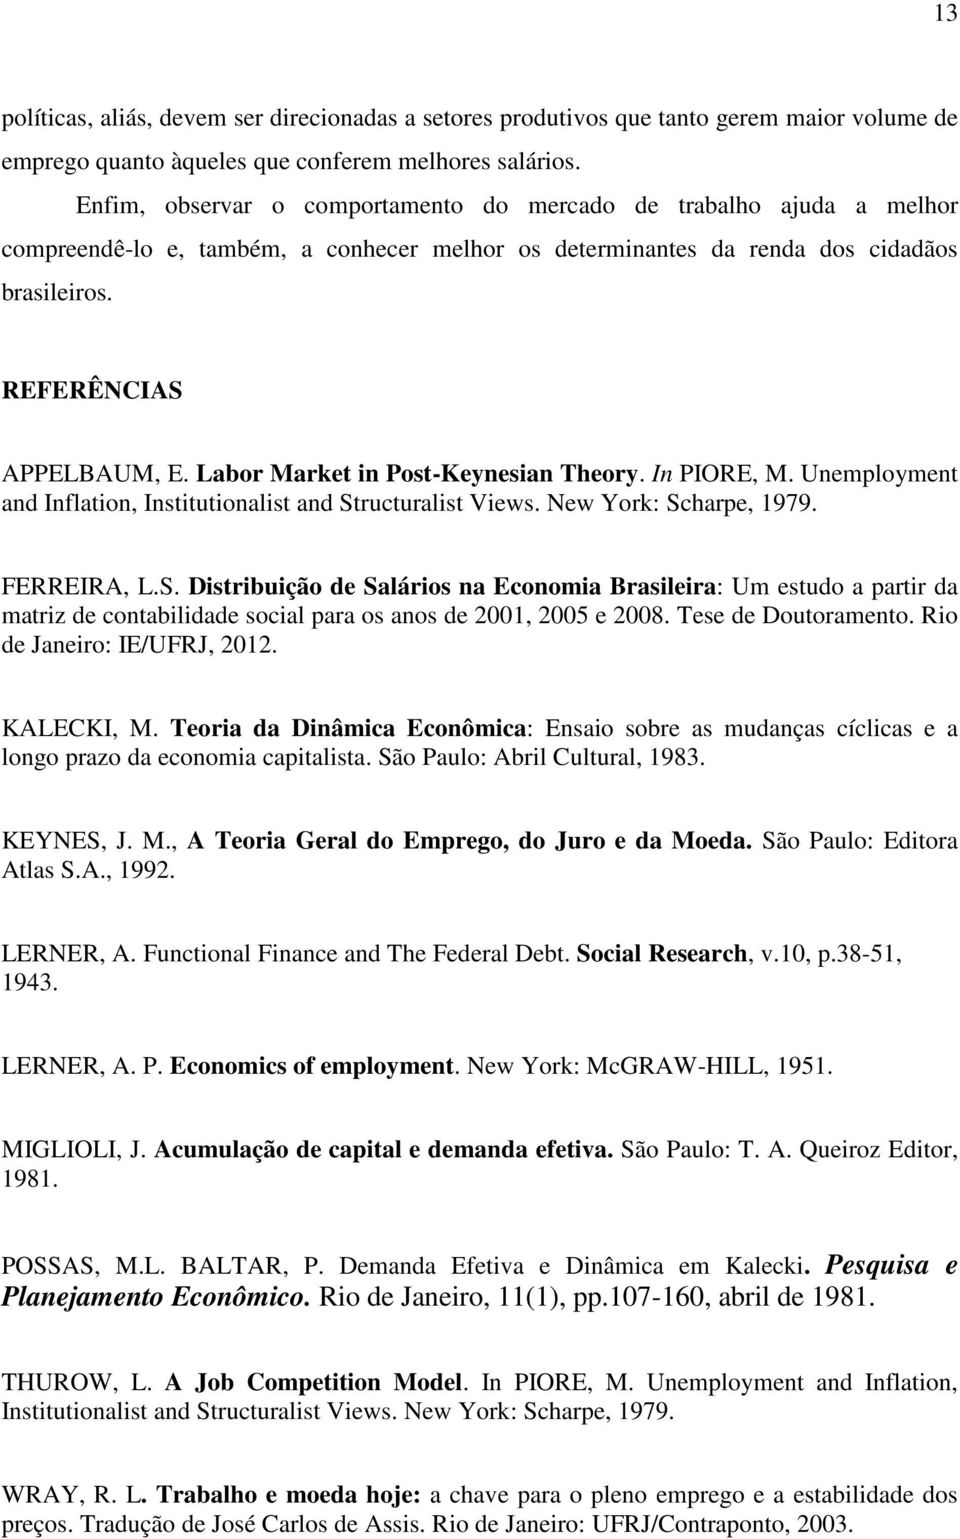 Labor Market in Post-Keynesian Theory. In PIORE, M. Unemployment and Inflation, Institutionalist and St